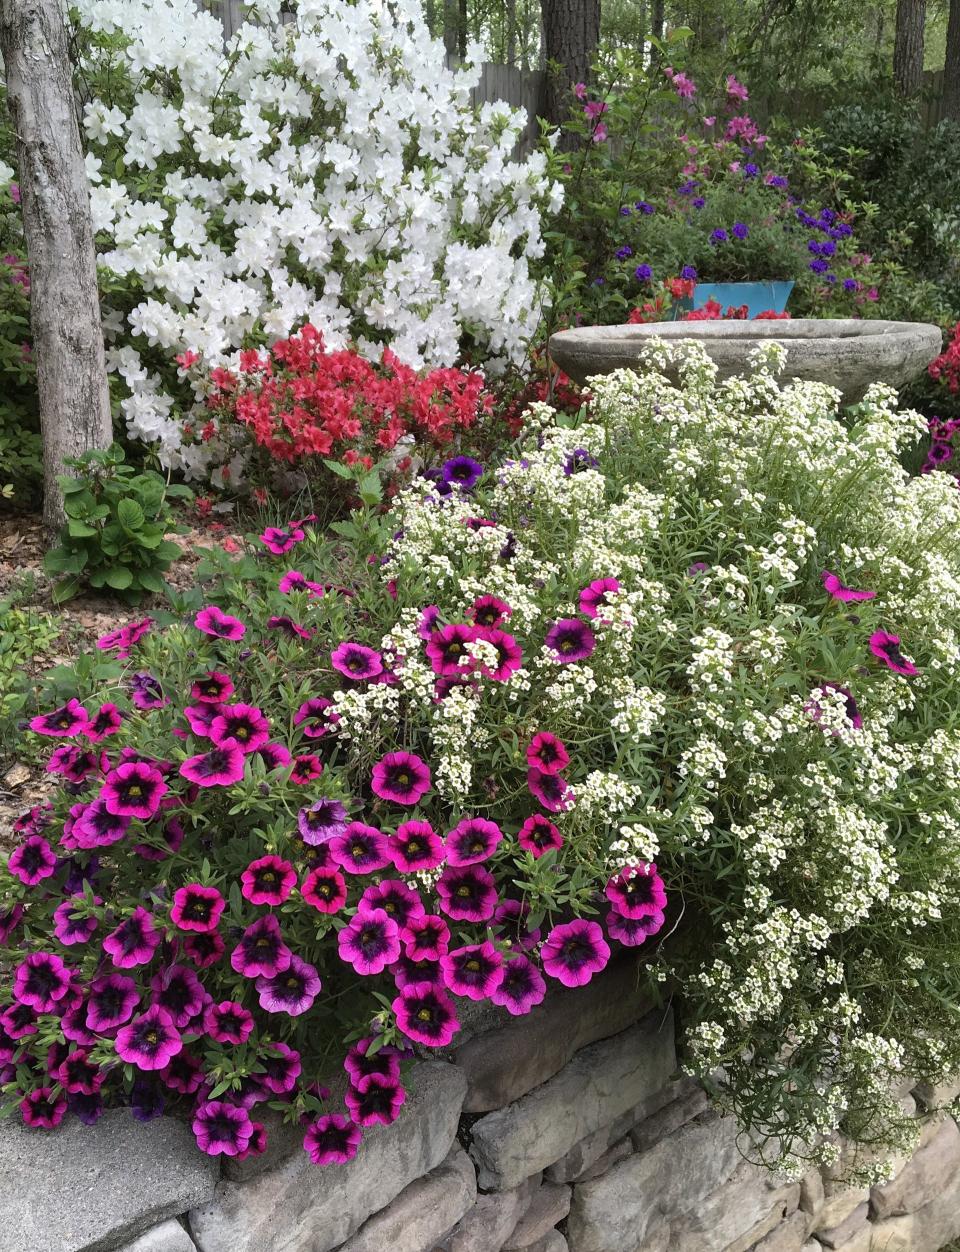 Superbells Blackcurrant Punch calibrachoa and White Knight sweet alyssum combine for a festive yet fragrant combination.